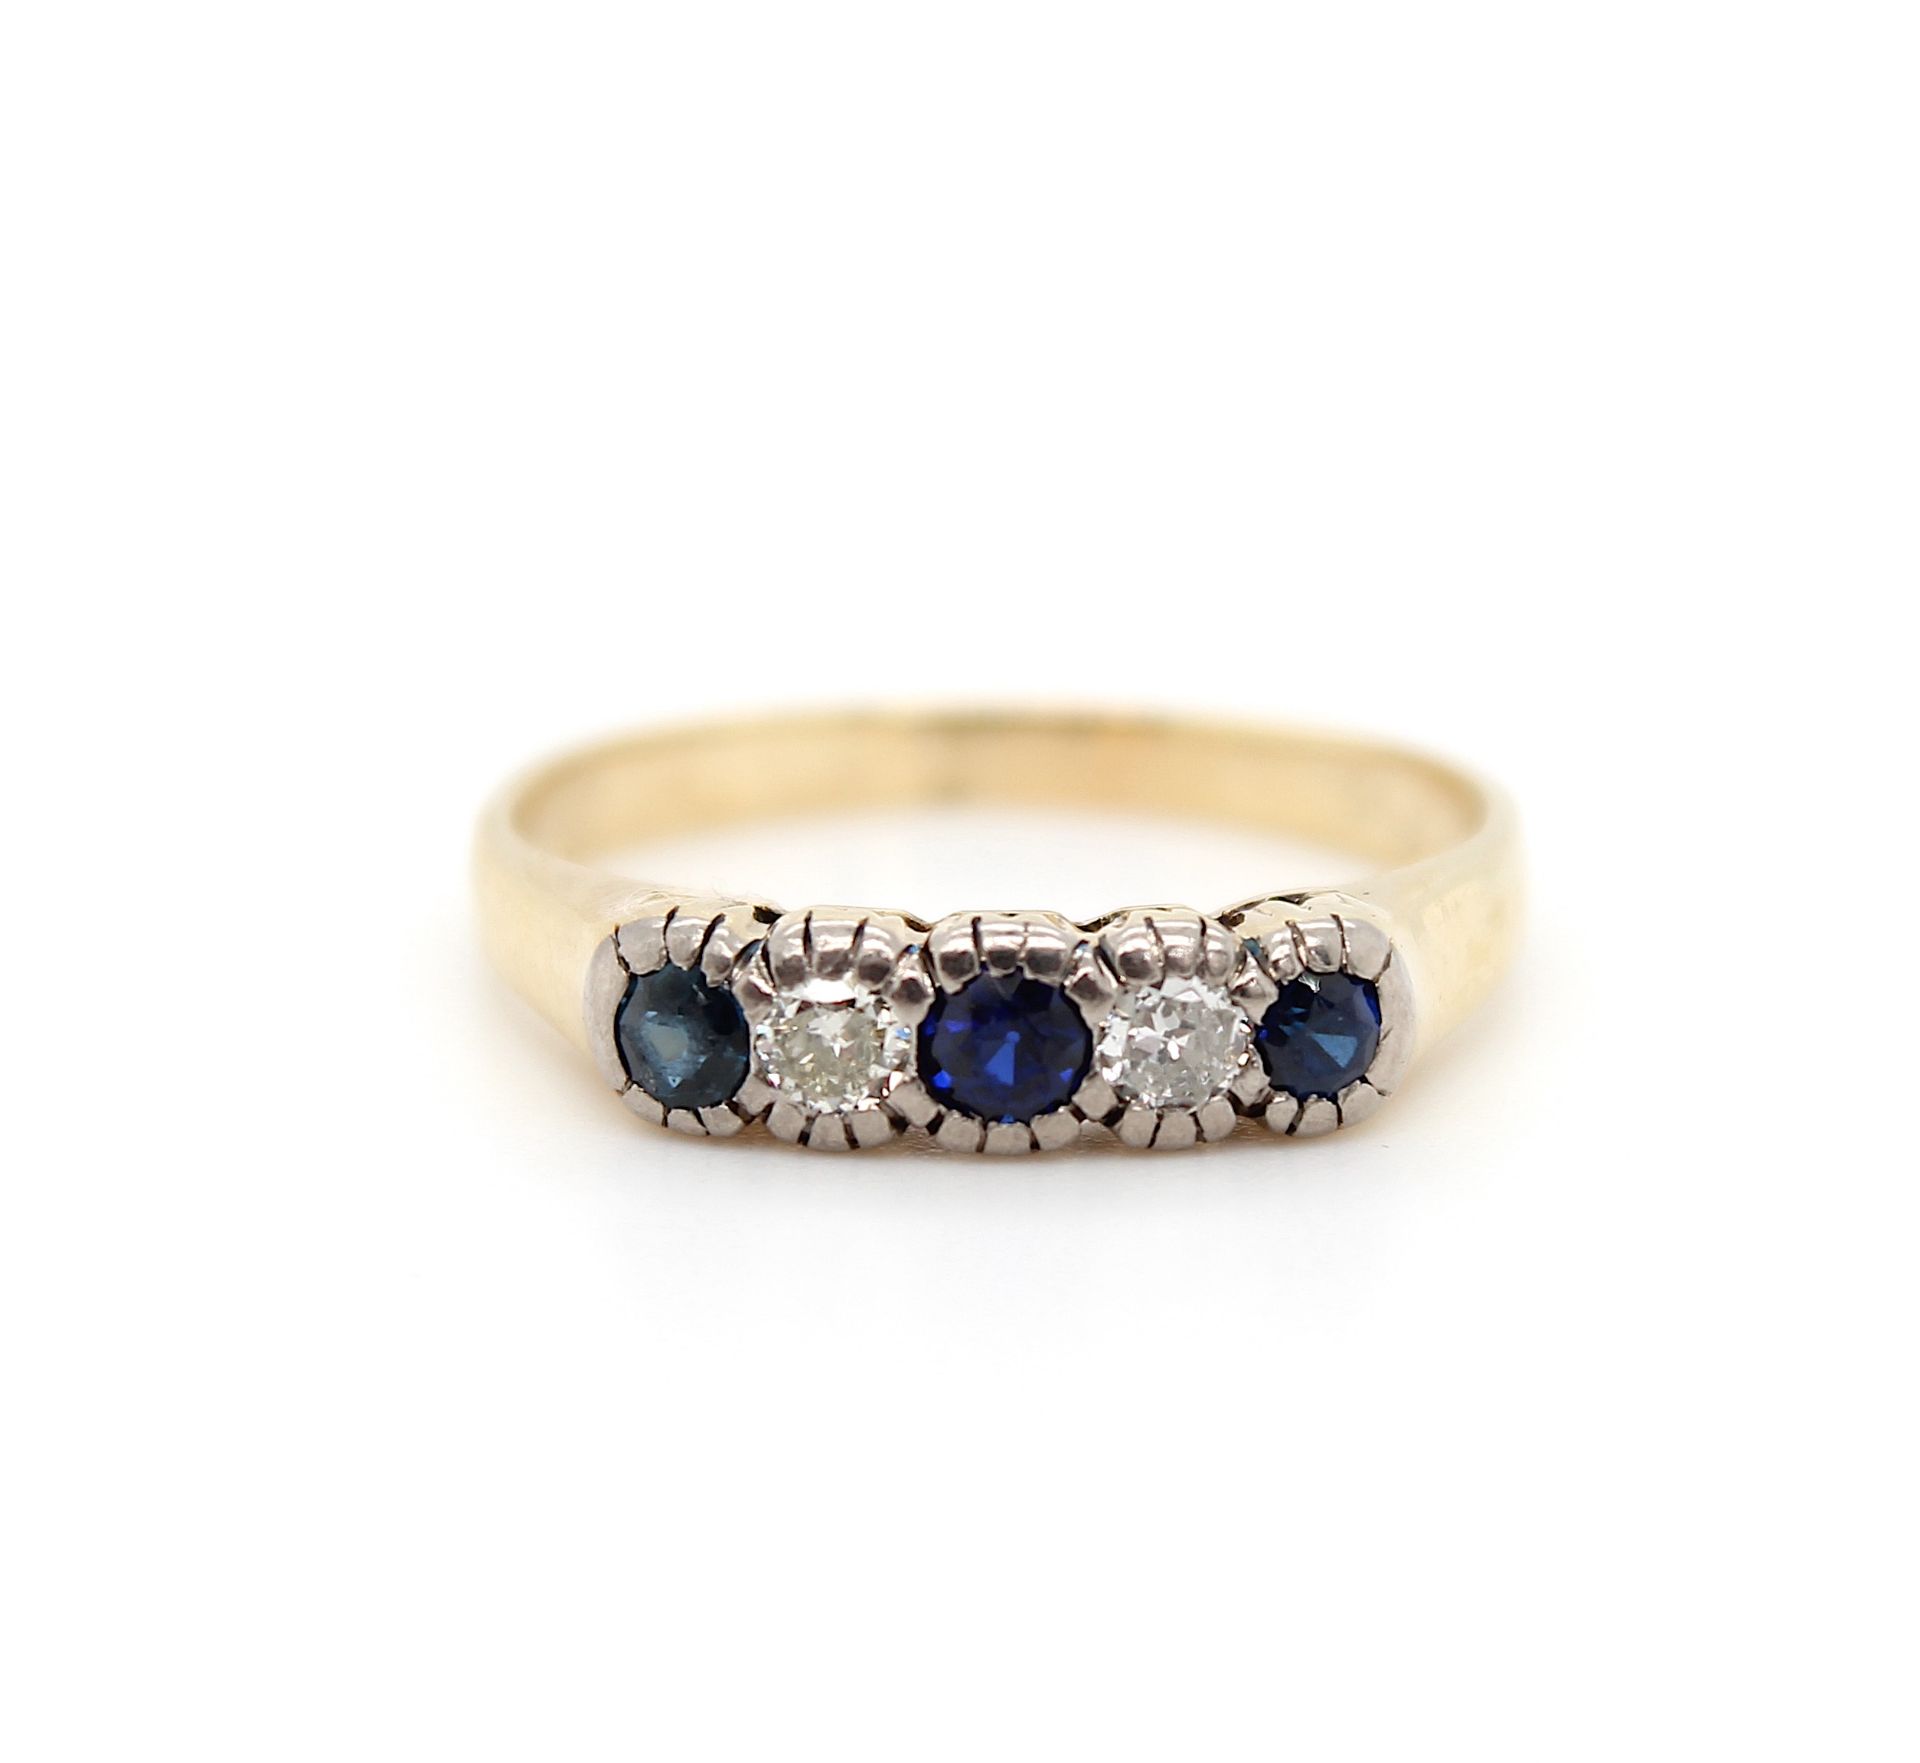 Vintage ring with sapphires and diamonds - Image 2 of 4